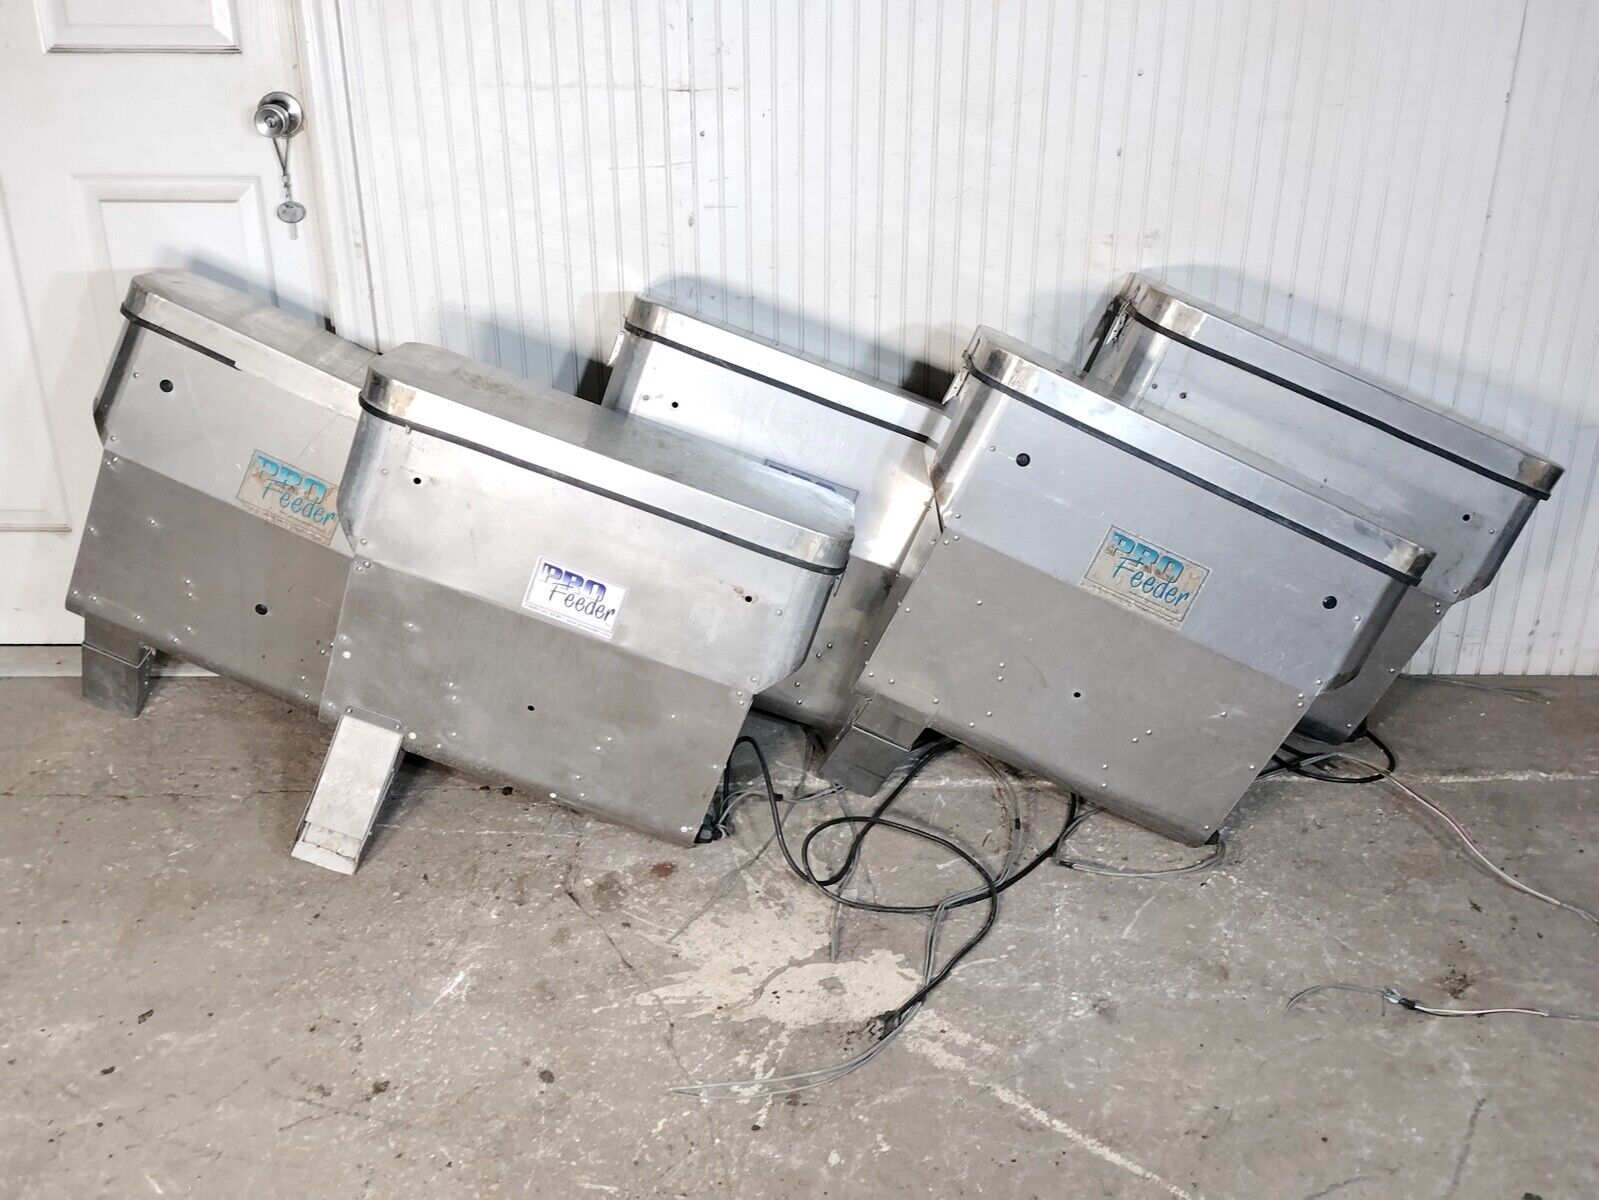 5 x Agpro Automatic Automated Horse Feeder s - HF200 & other models